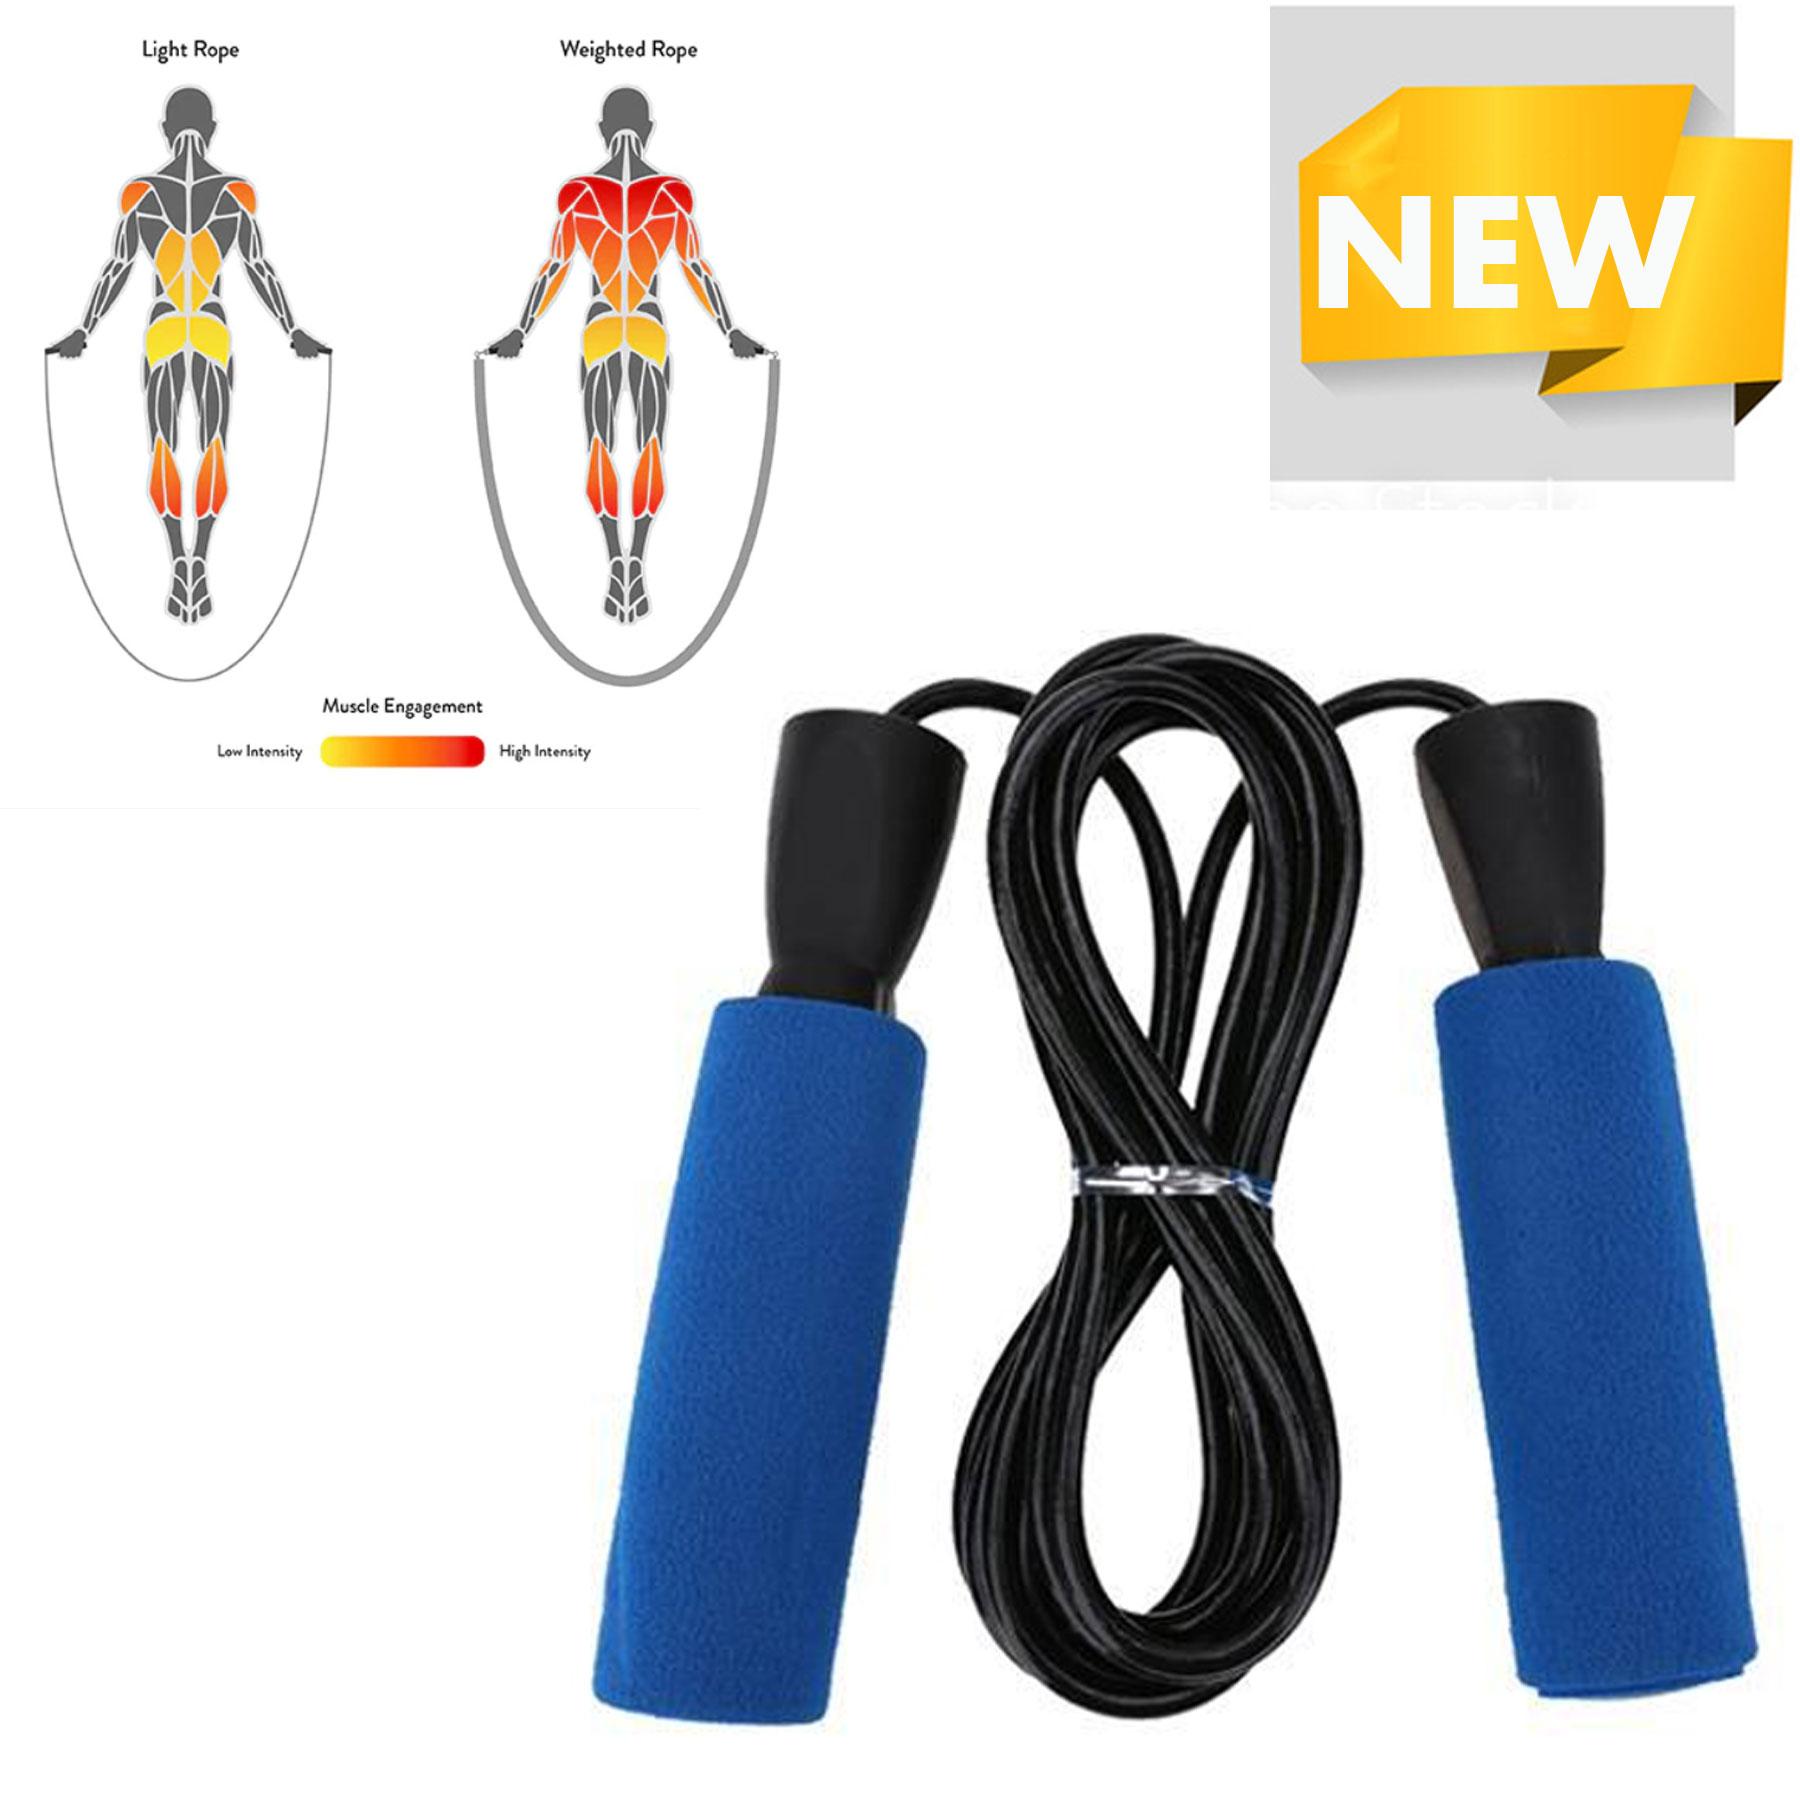 BENCH Weighted Skipping Rope Jump Rope fitness gym boxing slim weight loss NEW 